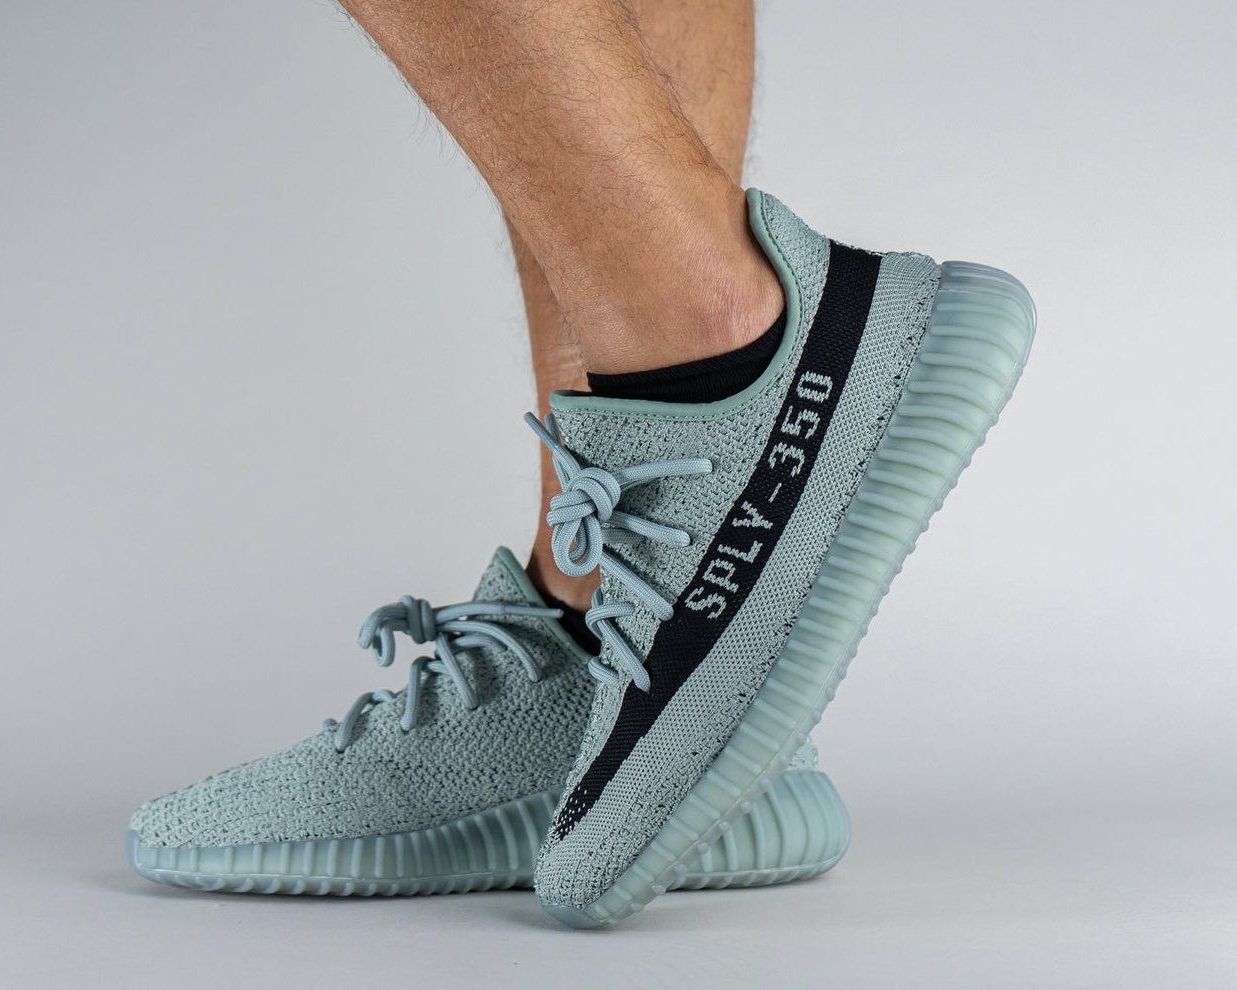 A Sneak Peek At The adidas Yeezy Boost 350 V2 True Form Jade Ash HQ2060 Release Date On-Feet